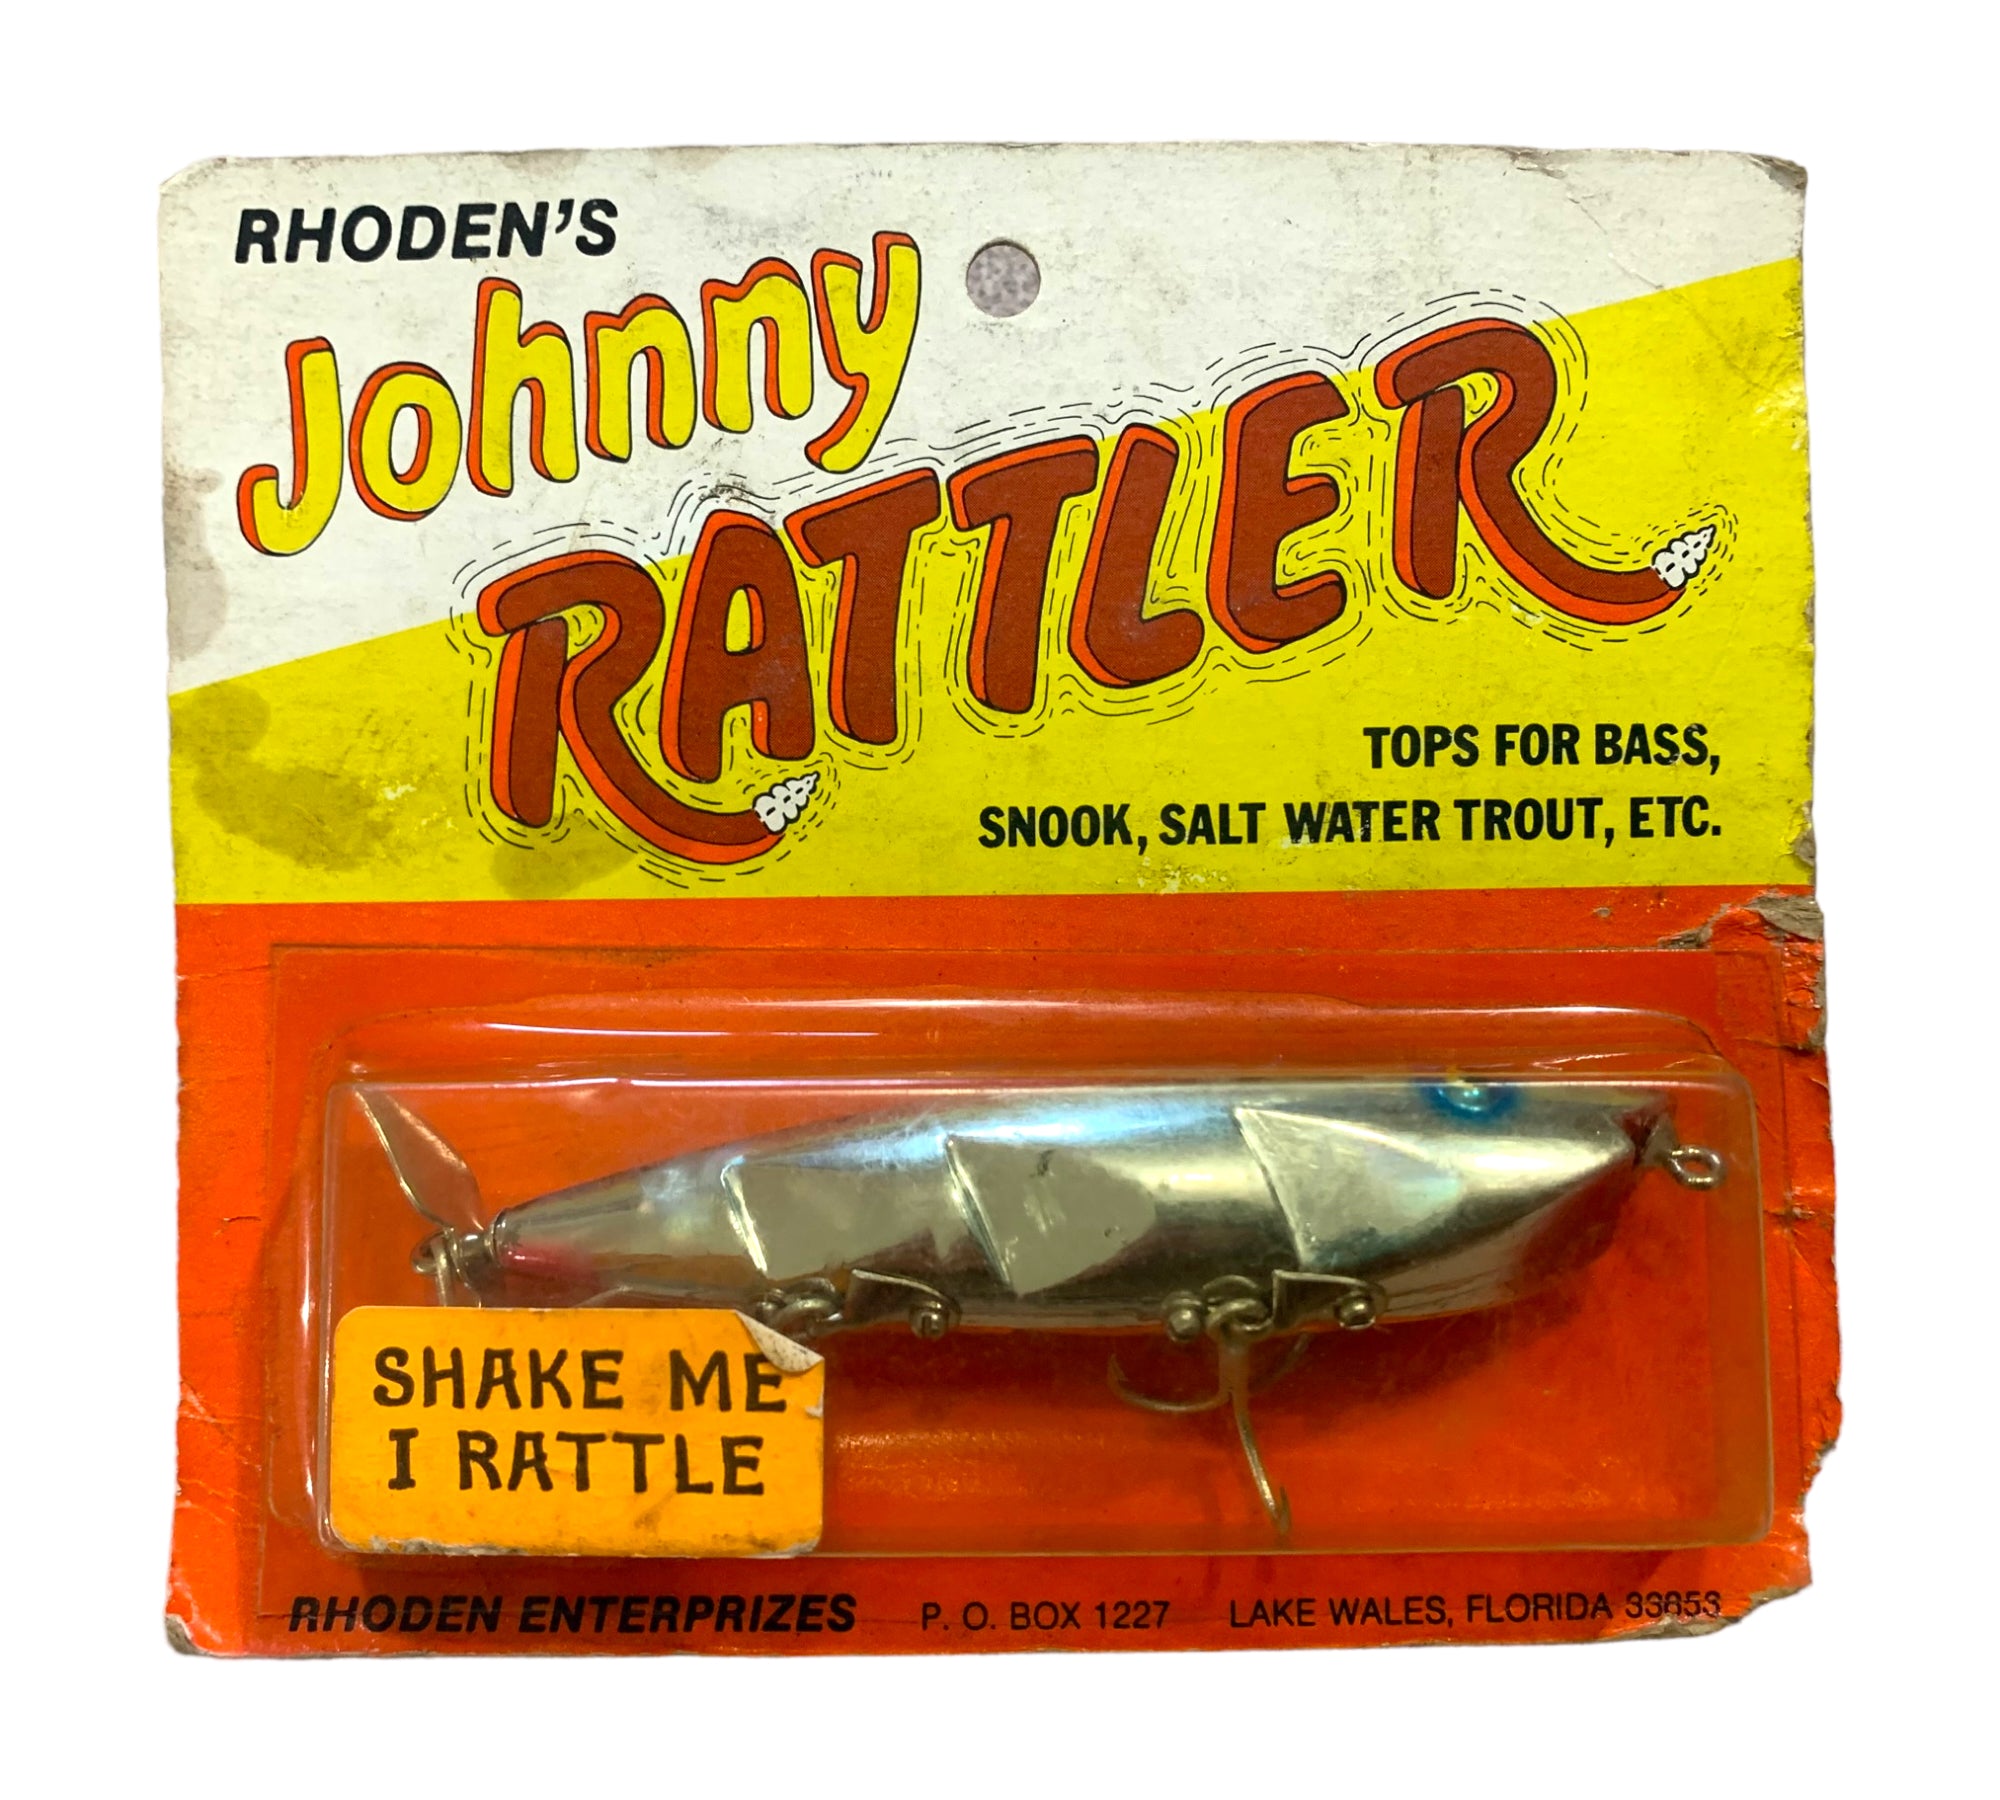 FLORIDA, USA • RHODEN'S JOHNNY RATTLER Fishing Lure • 6092 – Toad